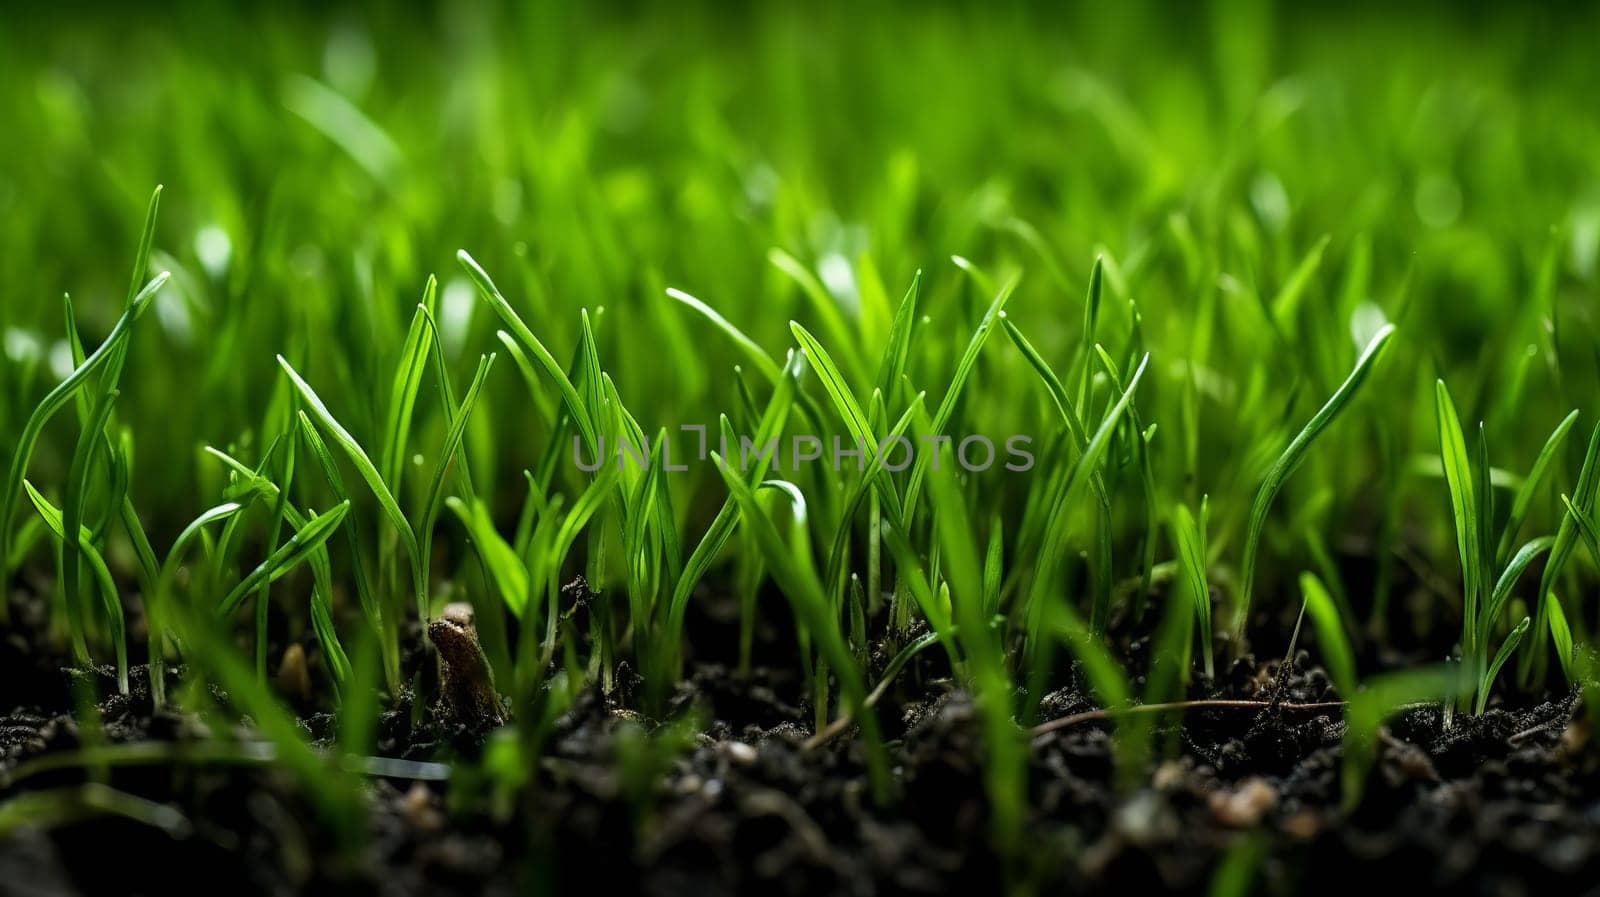  Grass texture stock photo Grass, Grass - Cultivated land, High angle view, Generate AI by Mrsongrphc